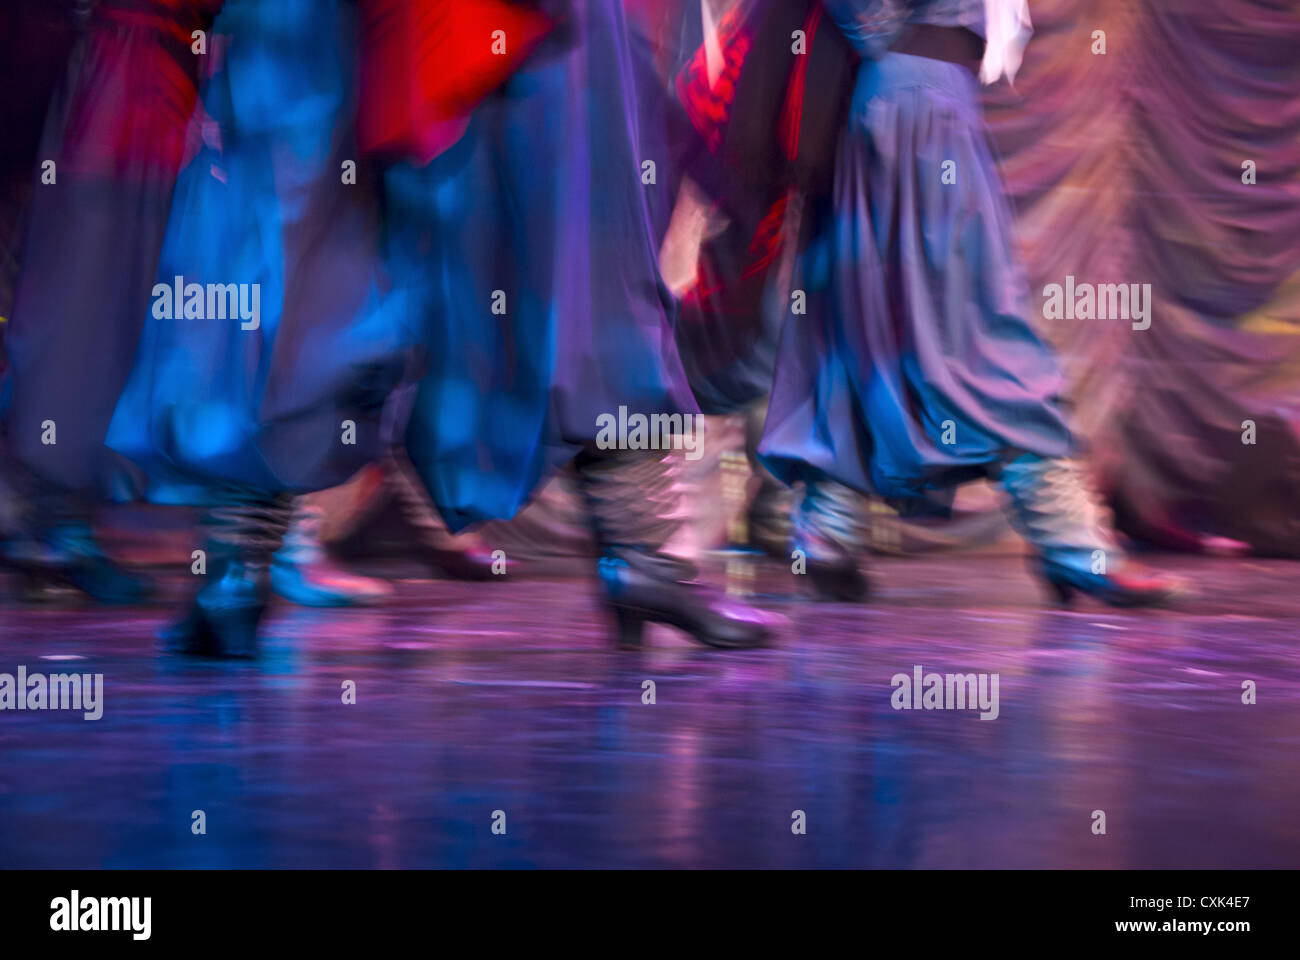 Latin American folkloric dance show, Argentina, South America Stock Photo